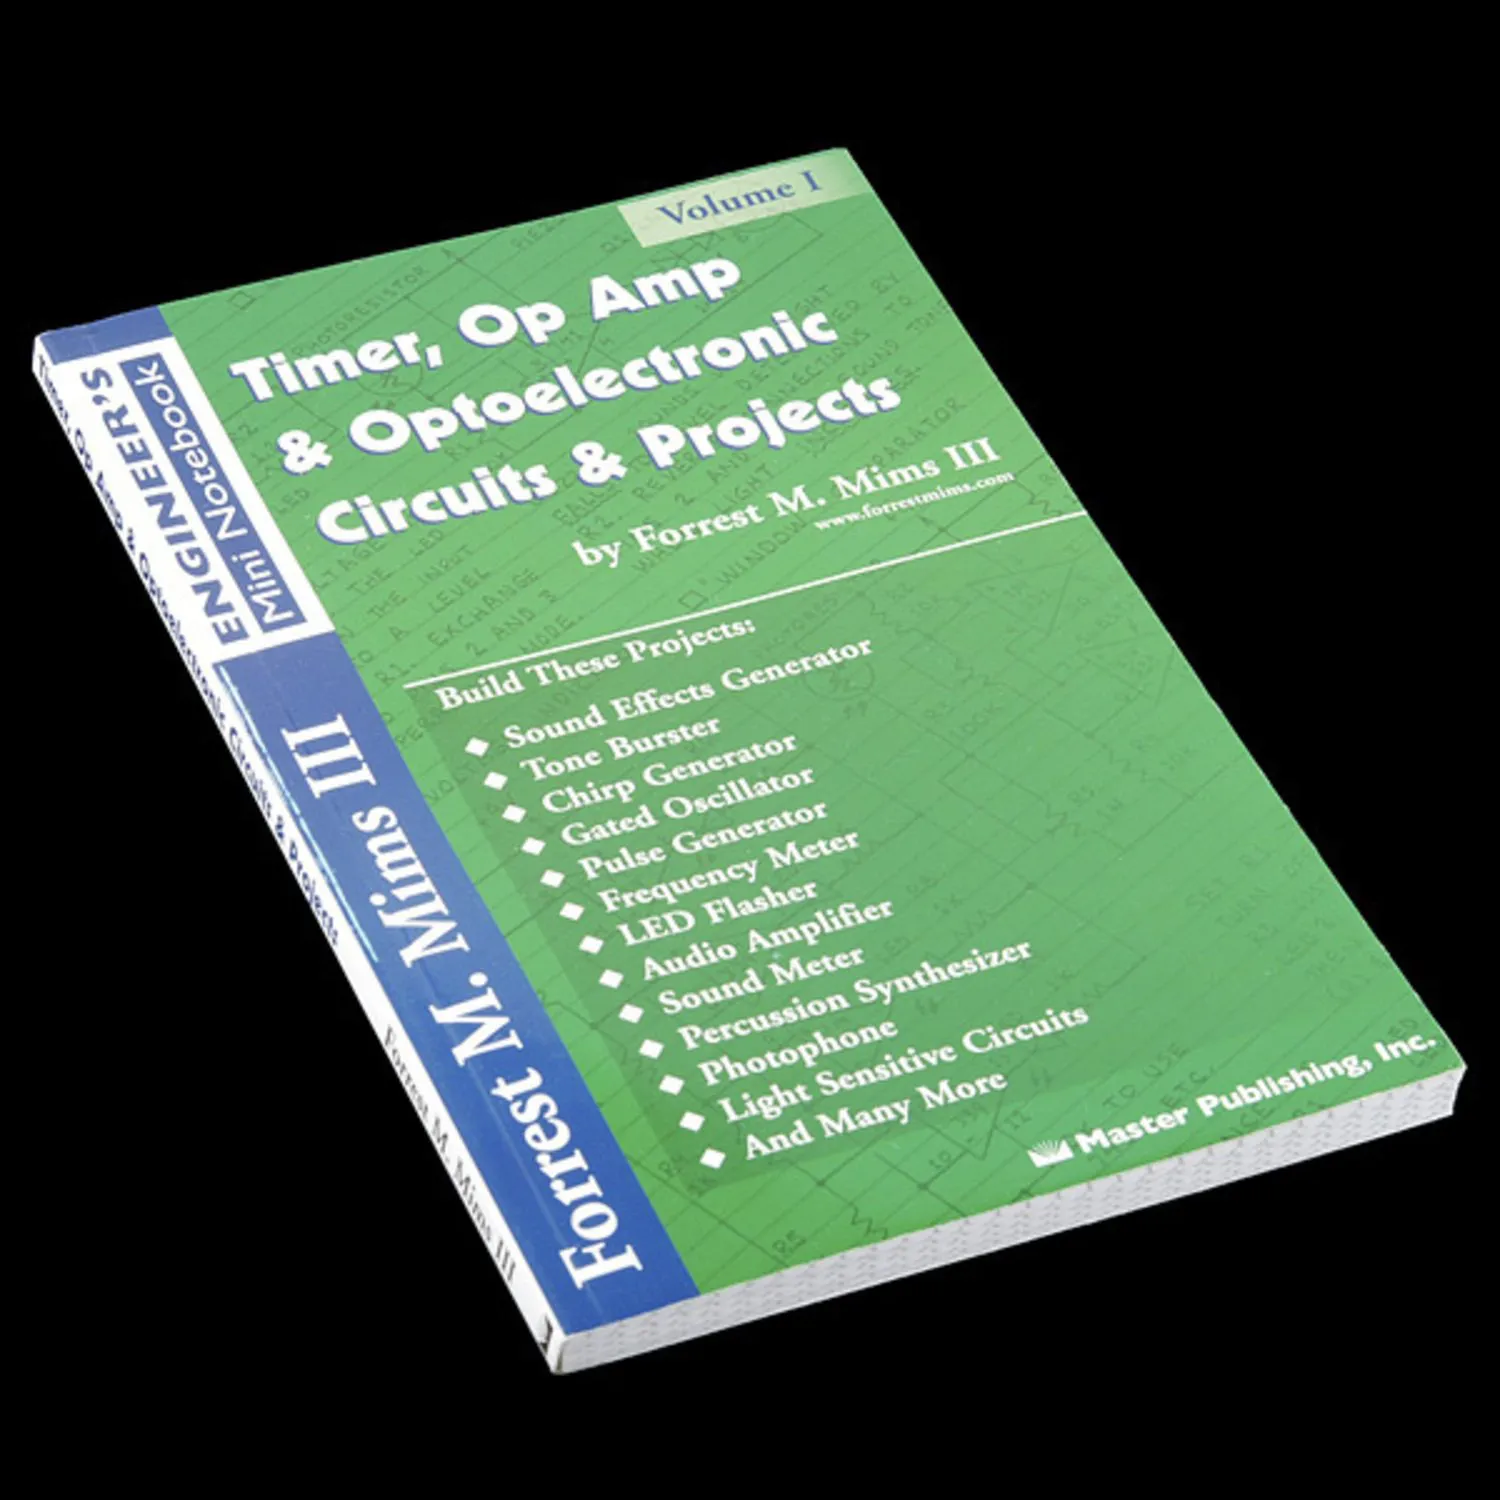 Photo of Timer, OpAmp  Optoelectronic Circuits  Projects